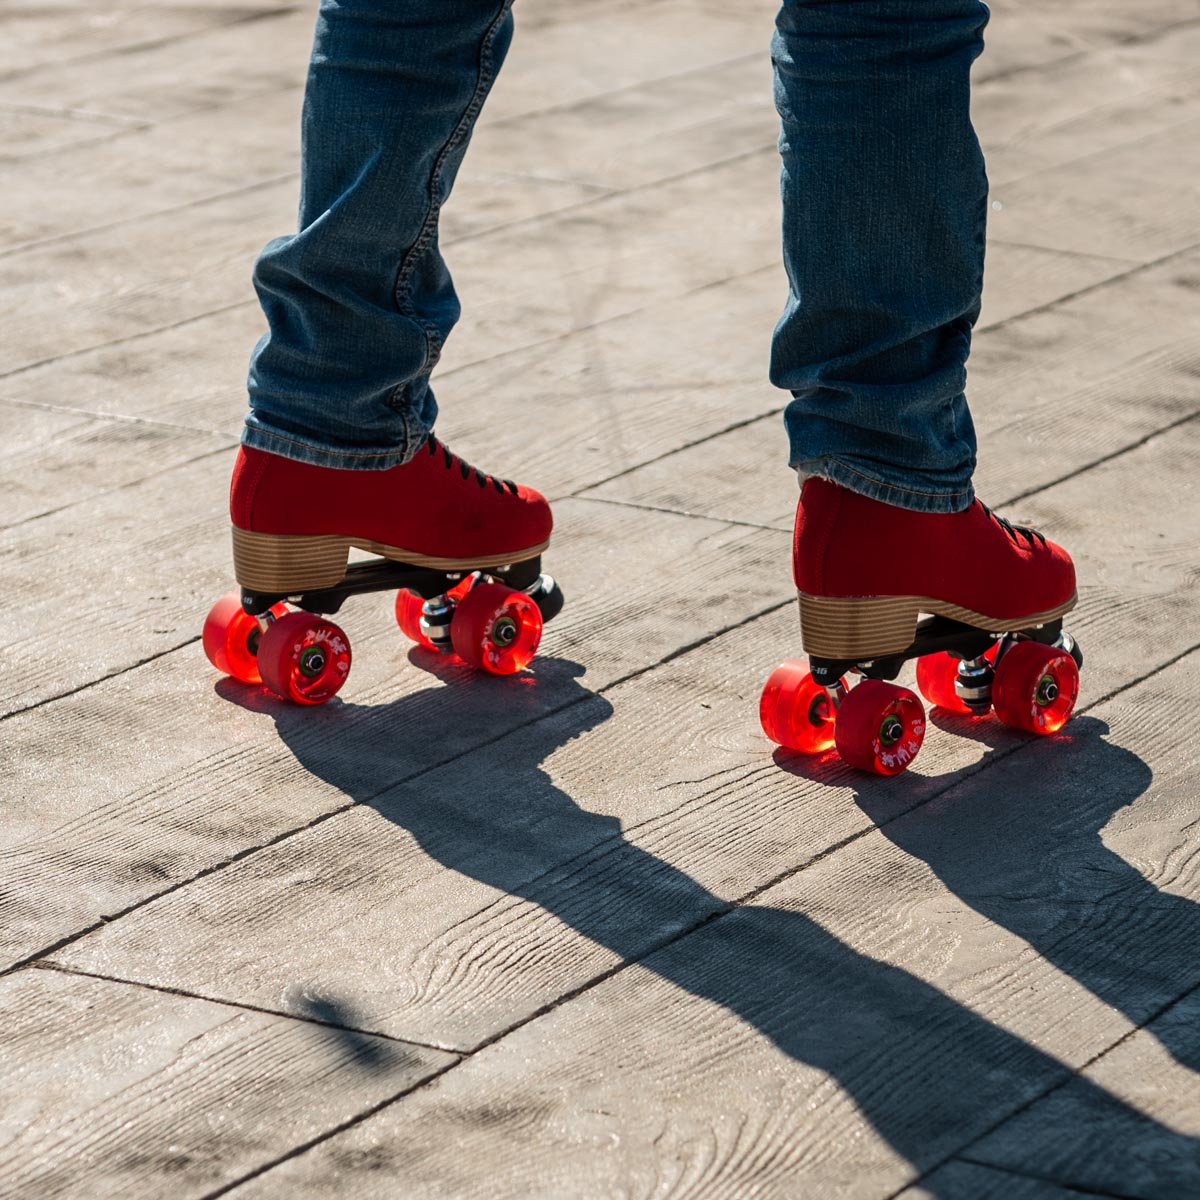 A pair of red roller skates with red wheels on a boardwalk.